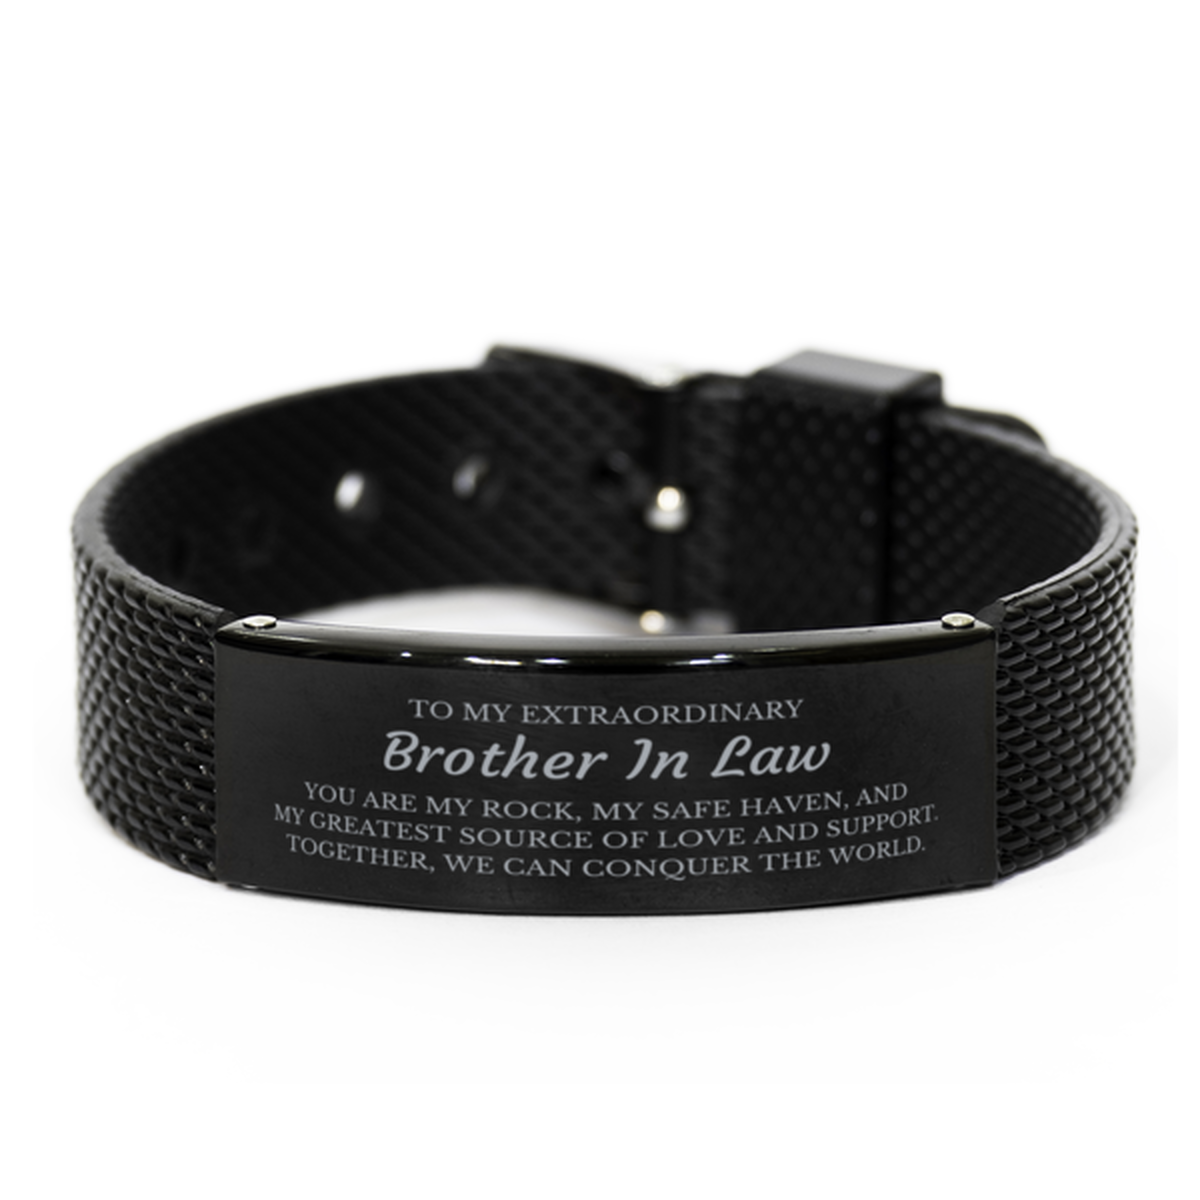 To My Extraordinary Brother In Law Gifts, Together, we can conquer the world, Birthday Black Shark Mesh Bracelet For Brother In Law, Christmas Gifts For Brother In Law